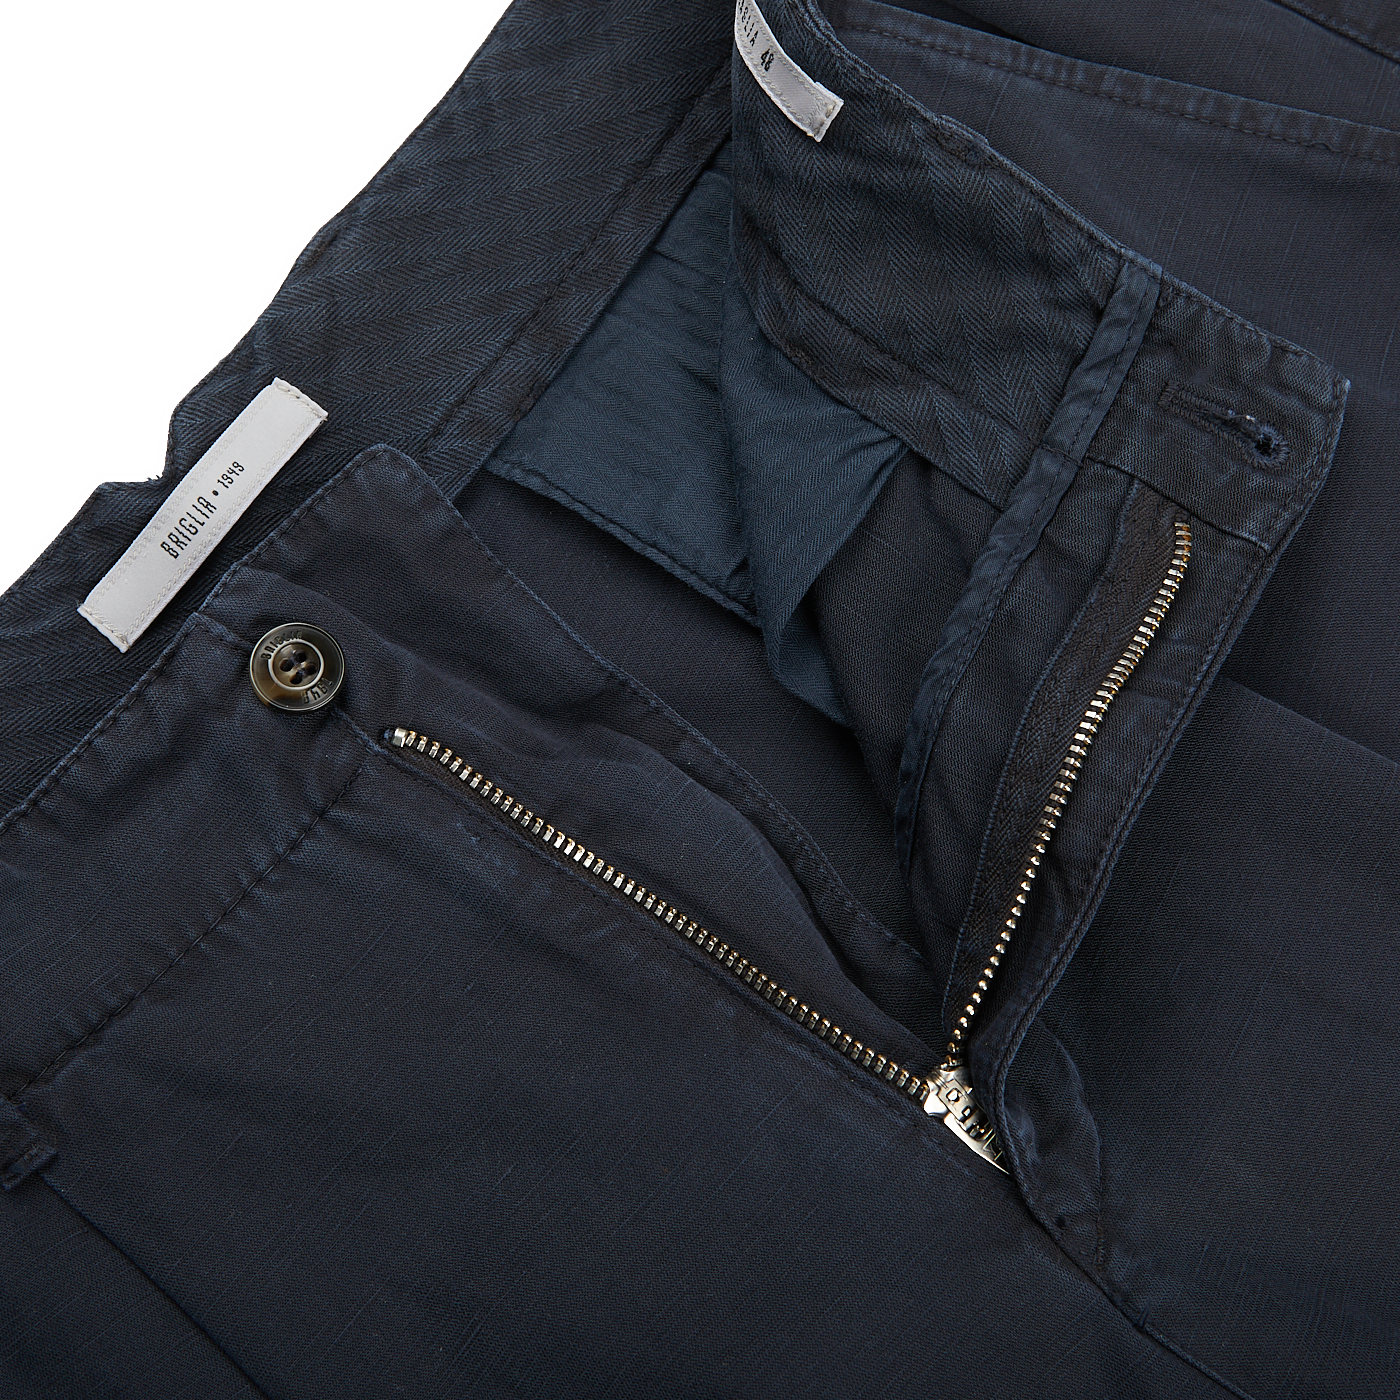 A pair of Navy Blue Cotton Linen BG59 Pleated Chinos with zippered pockets, made from an upcycled mix of cotton and linen. These Italian specialist Briglia pants are both stylish and functional.